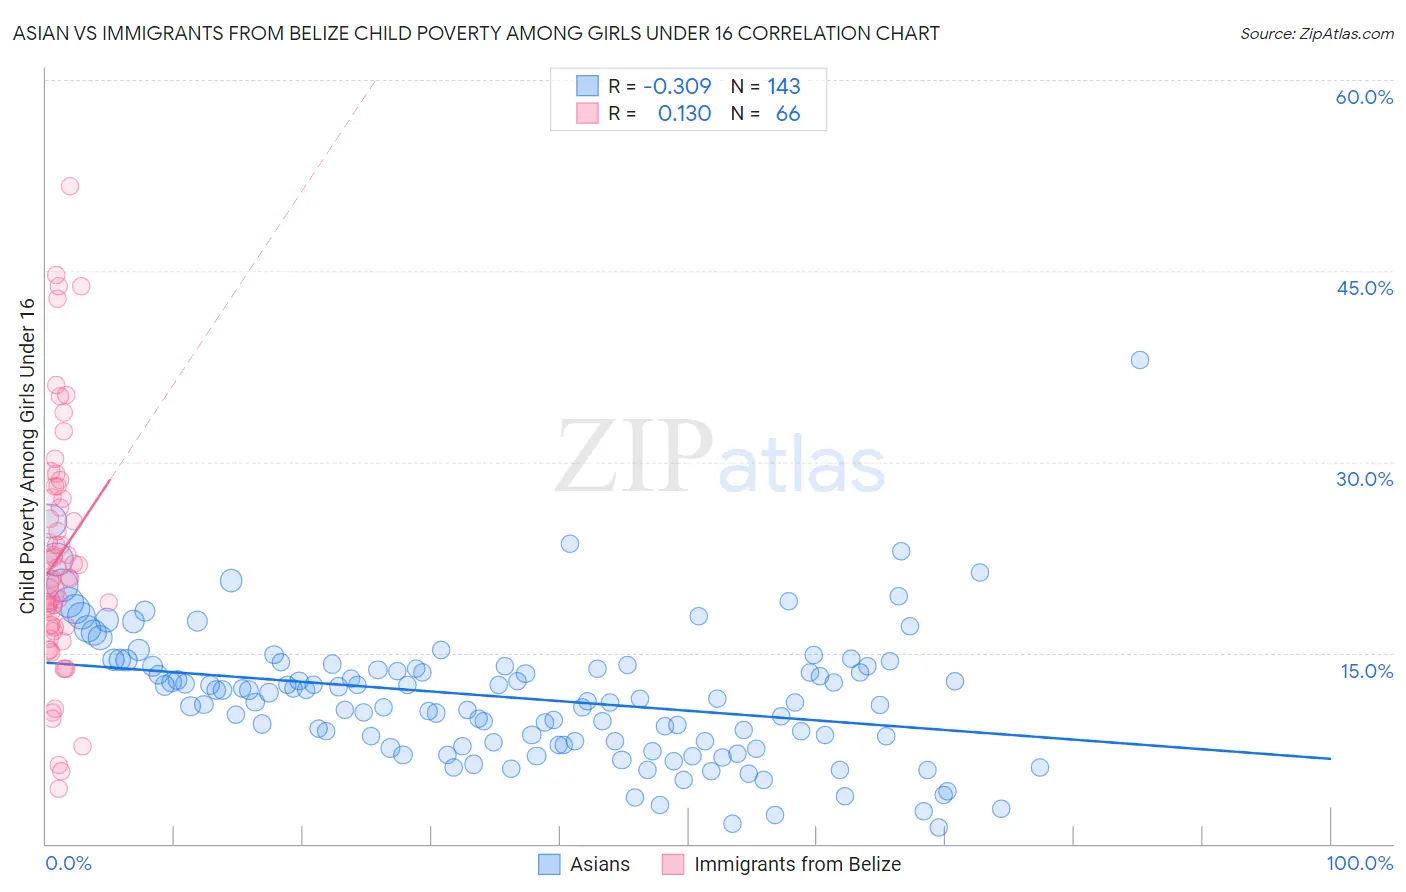 Asian vs Immigrants from Belize Child Poverty Among Girls Under 16